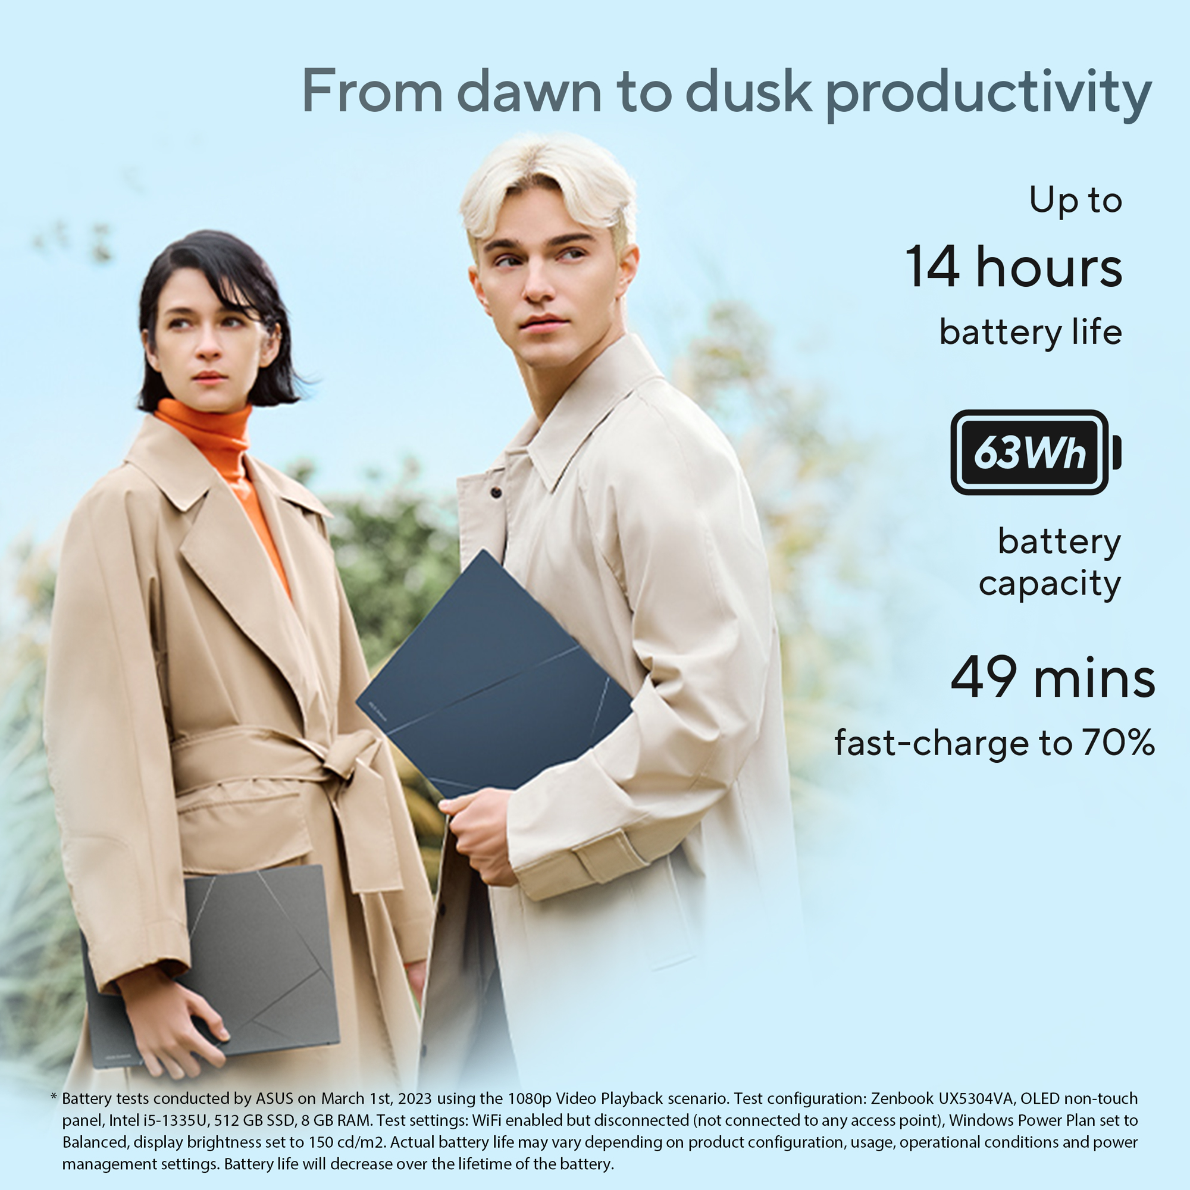 Long battery life and easy charging: The Zenbook S 13 OLED features a 63Wh battery, providing users with up to 14 hours of battery life